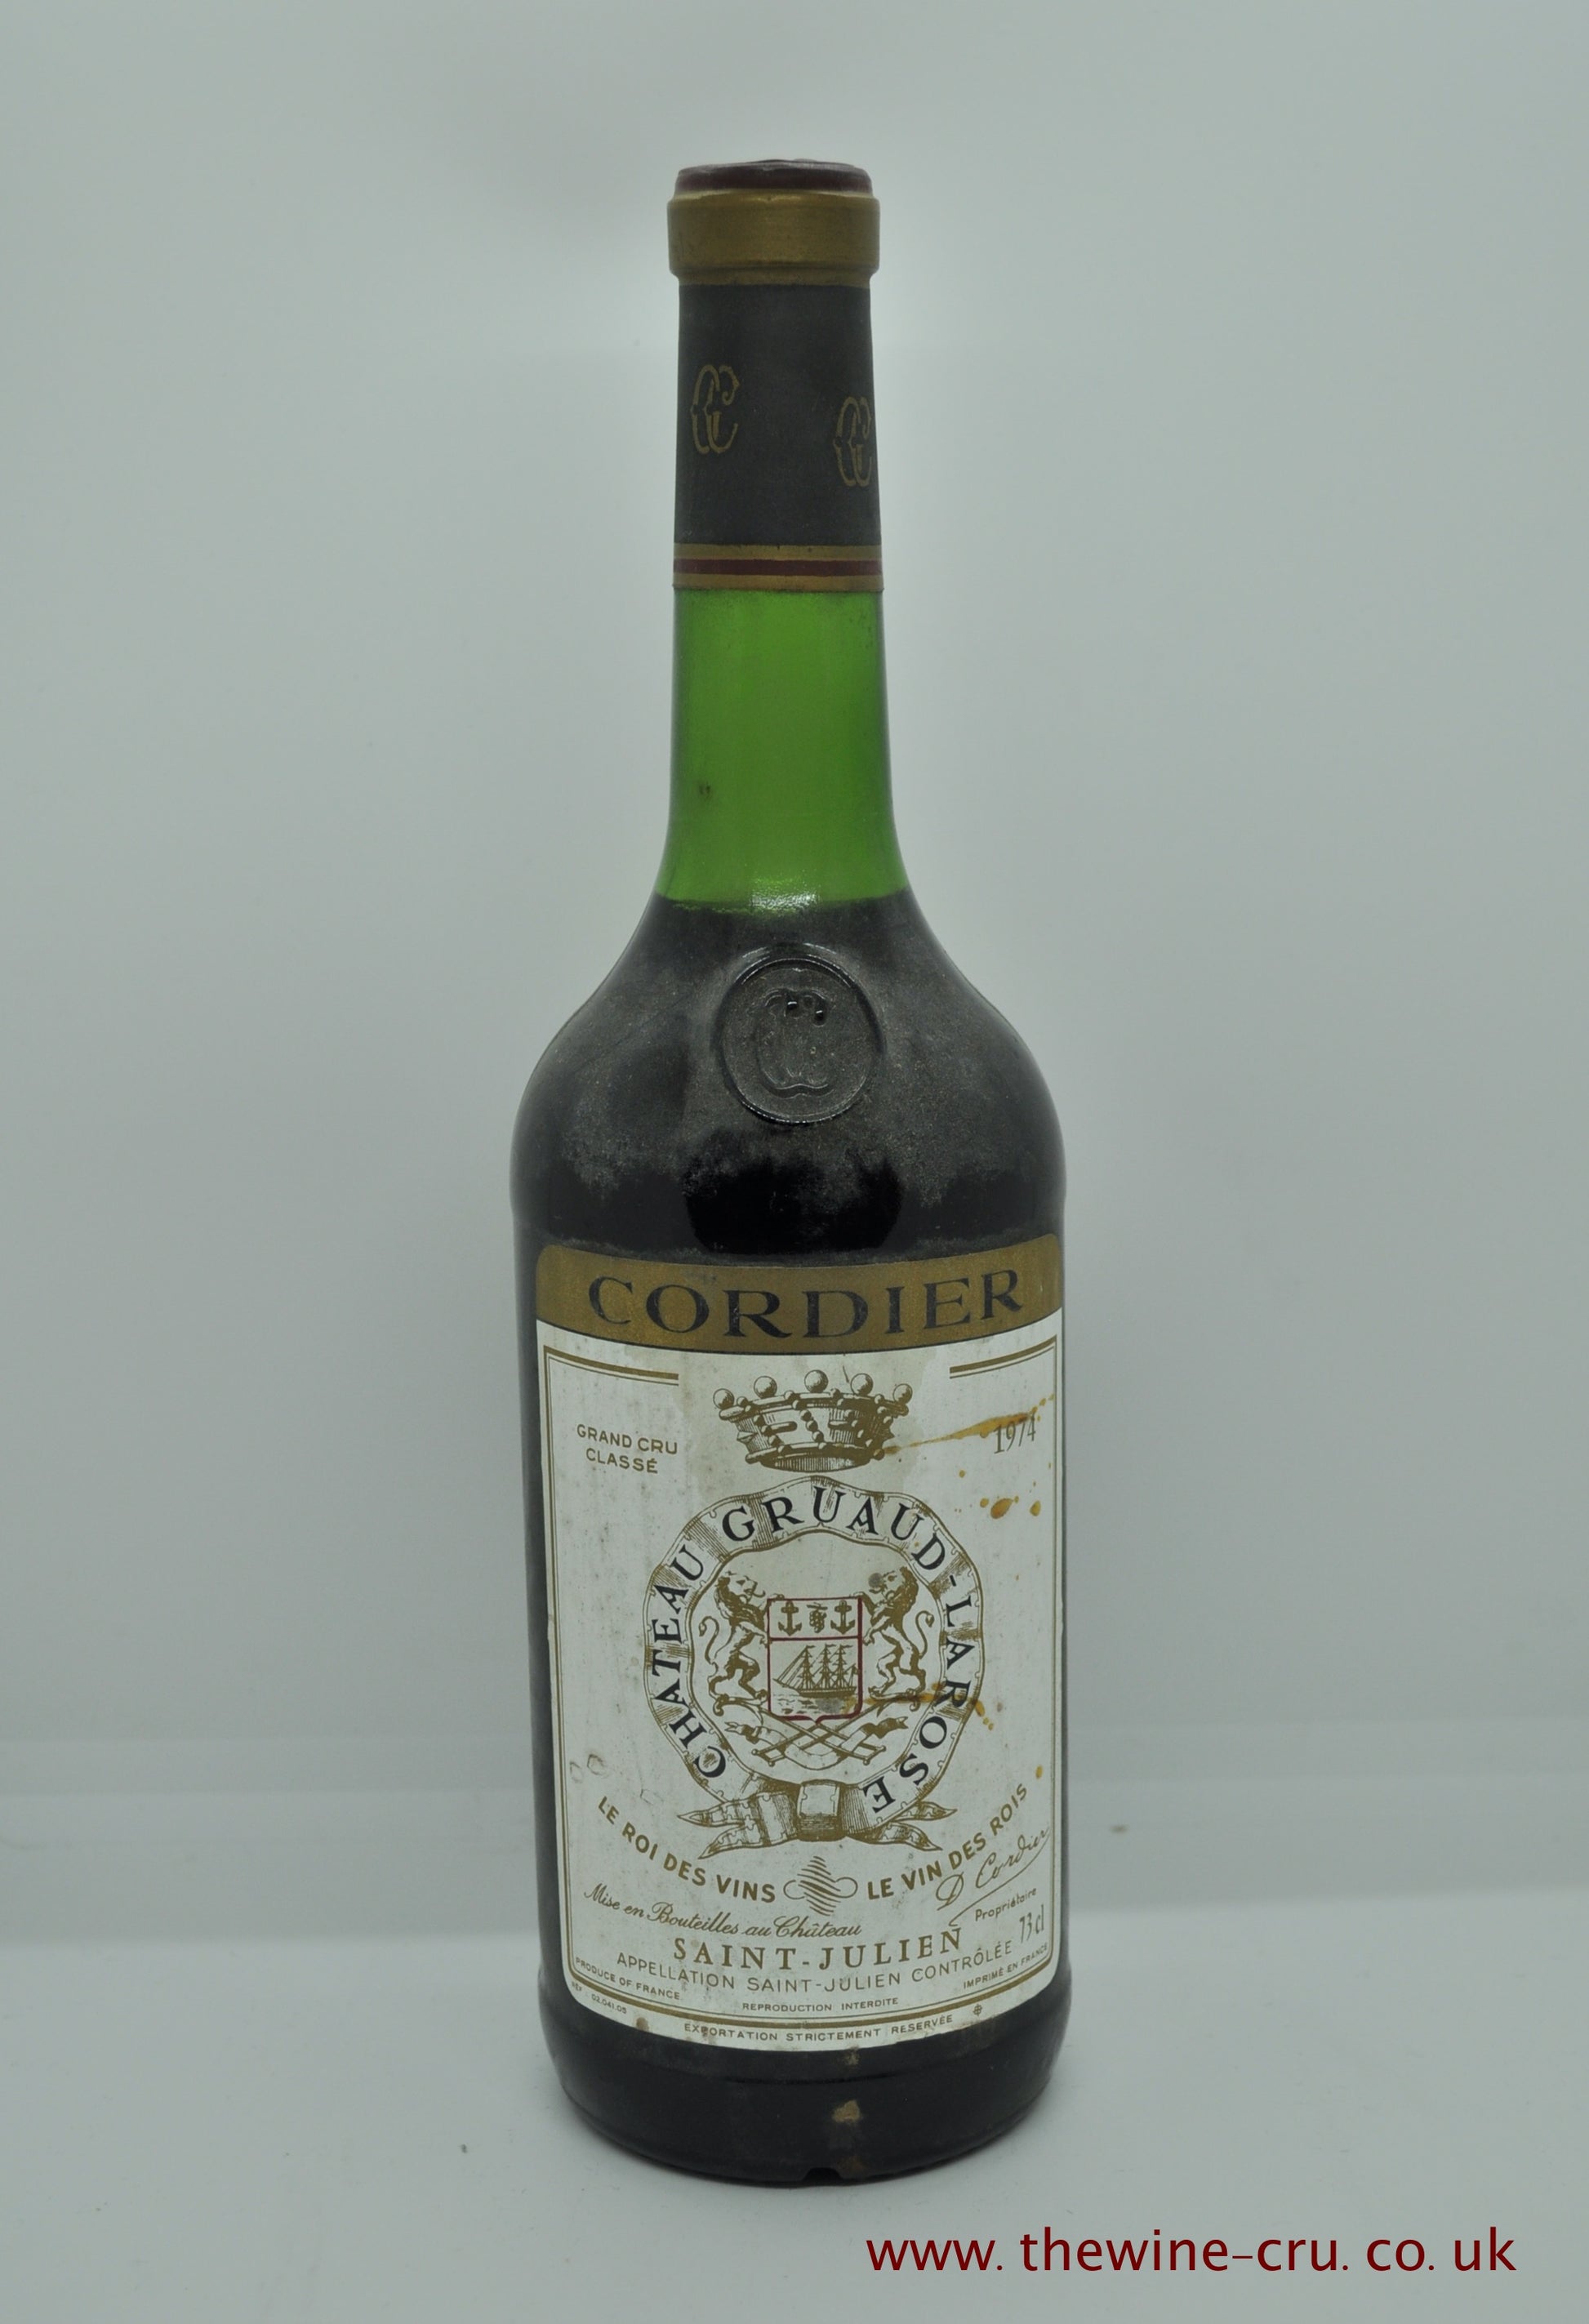 1974 vintage red wine. Chateau Gruaud Larose 1974. France Bordeaux. Immediate delivery. Free local delivery. Gift wrapping available.